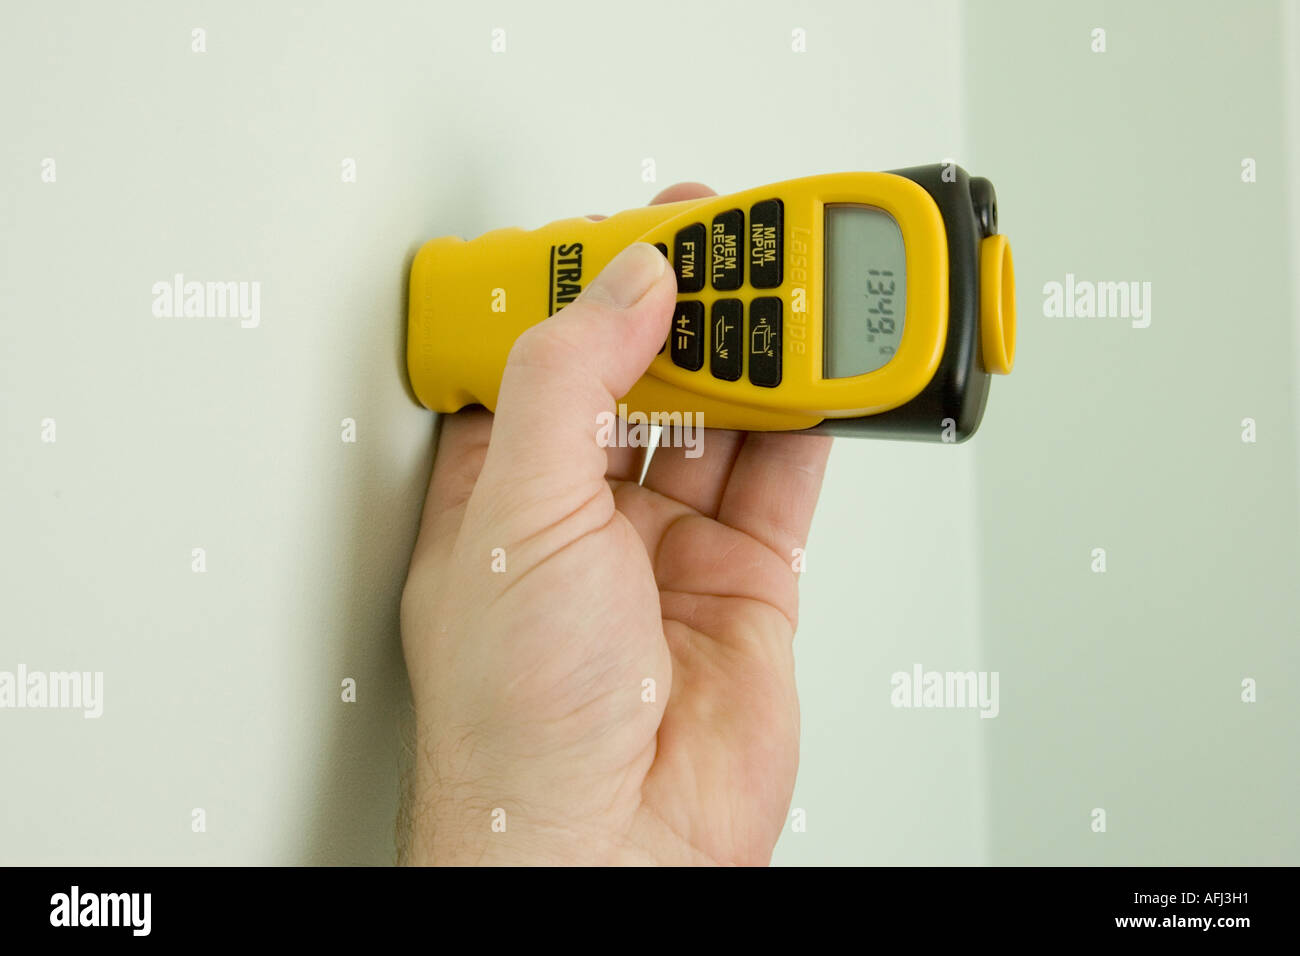 using an ultrasonic measure held against a wall for reference point Stock Photo